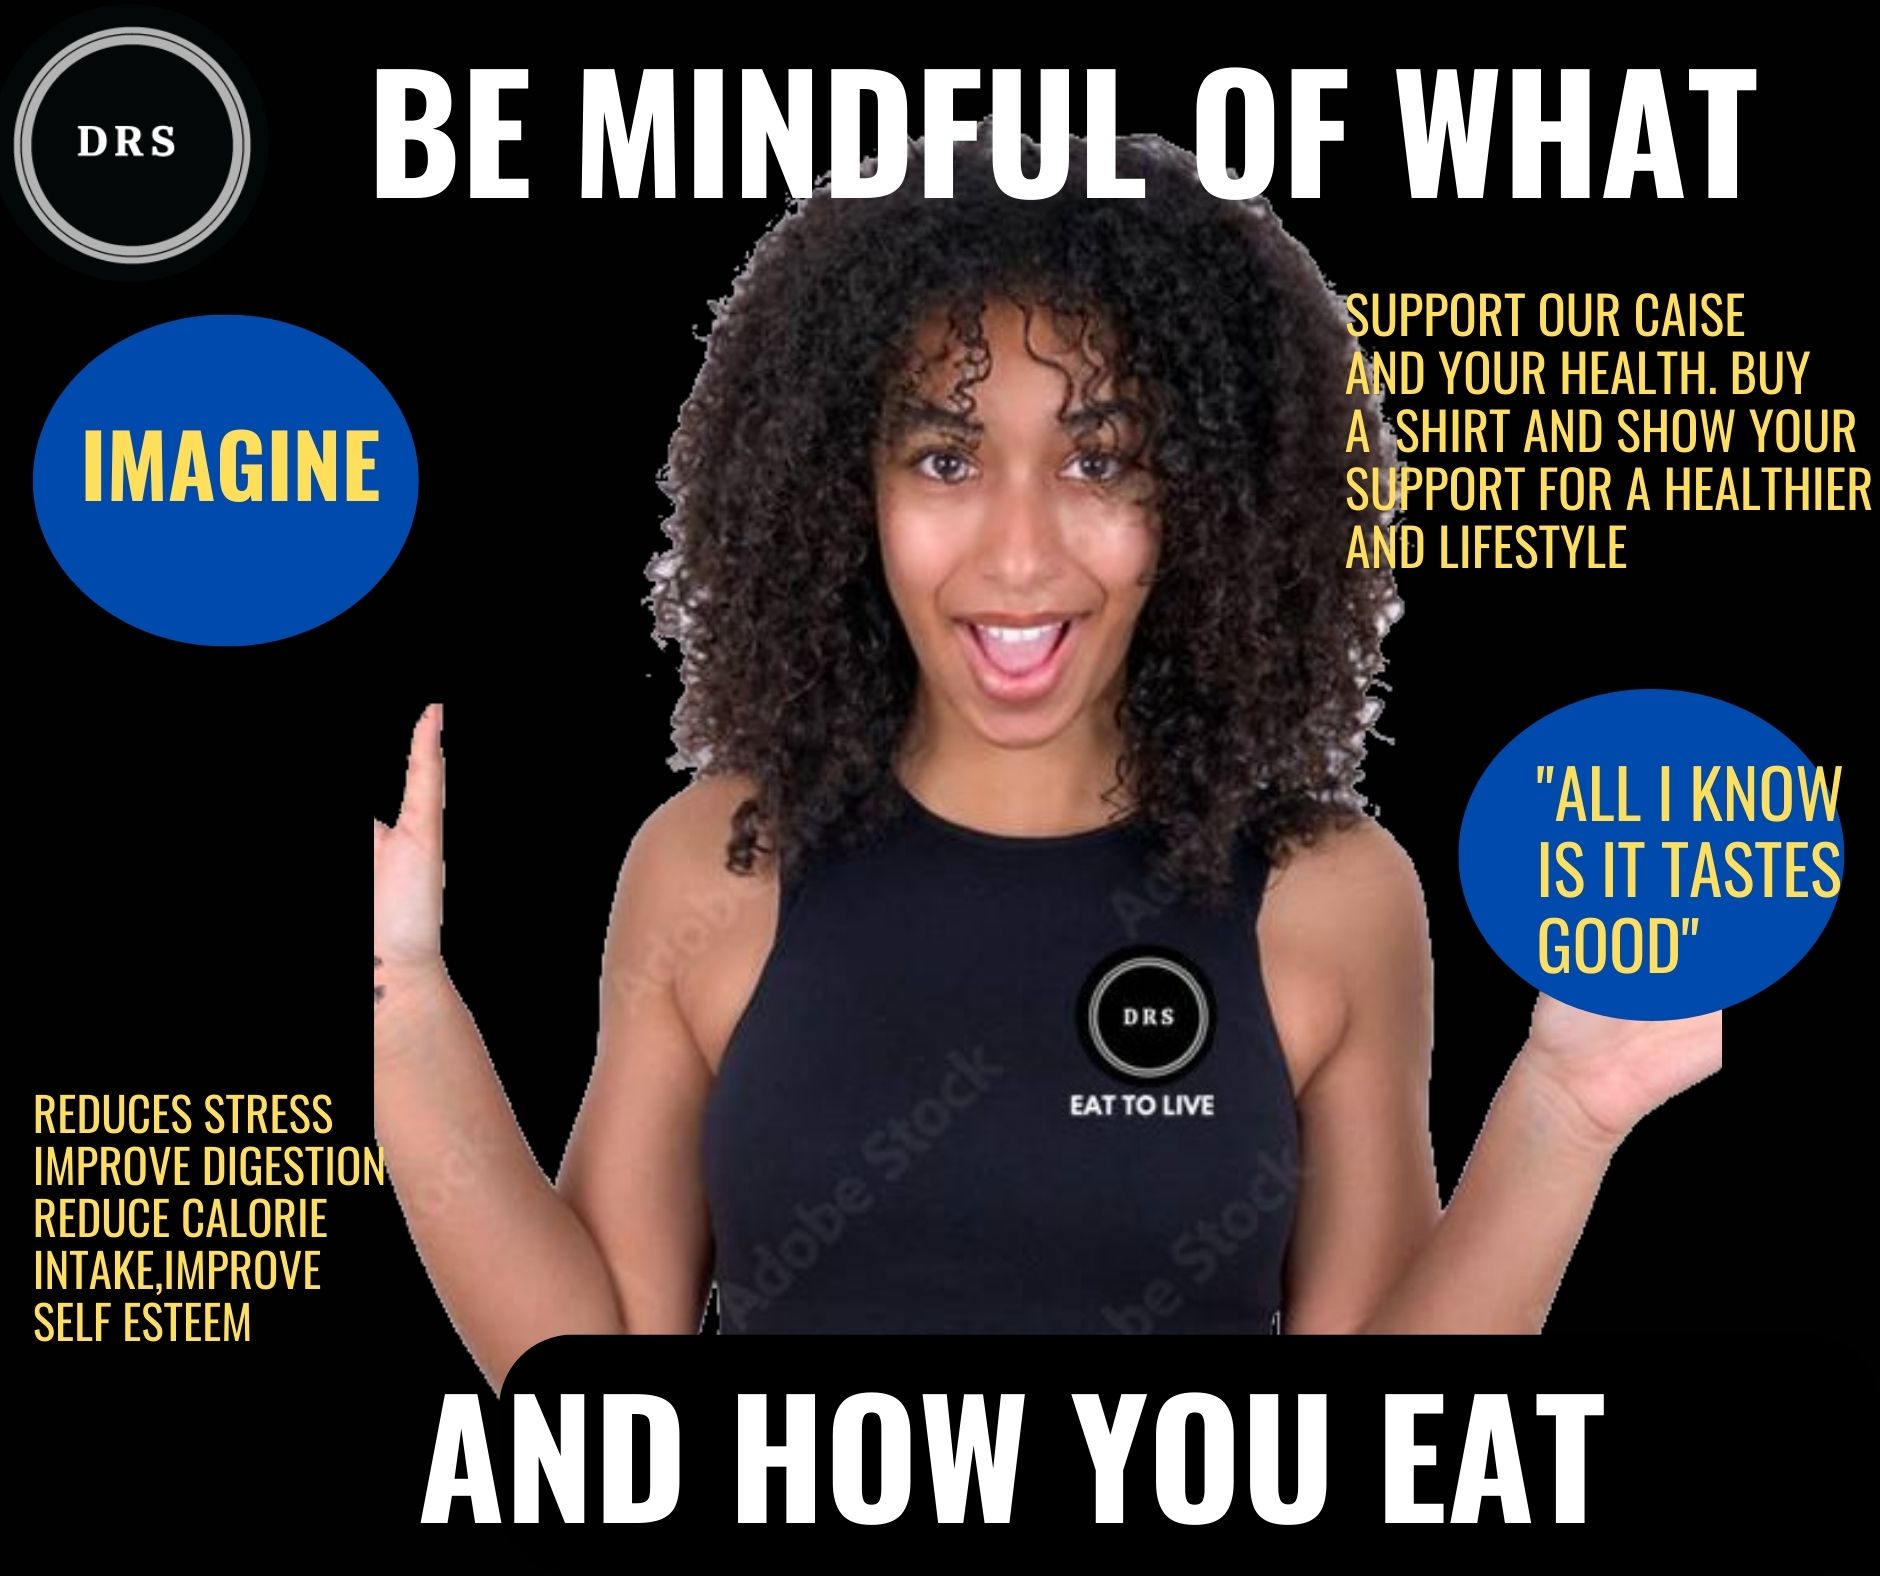 Be Mindful of what and how you eat